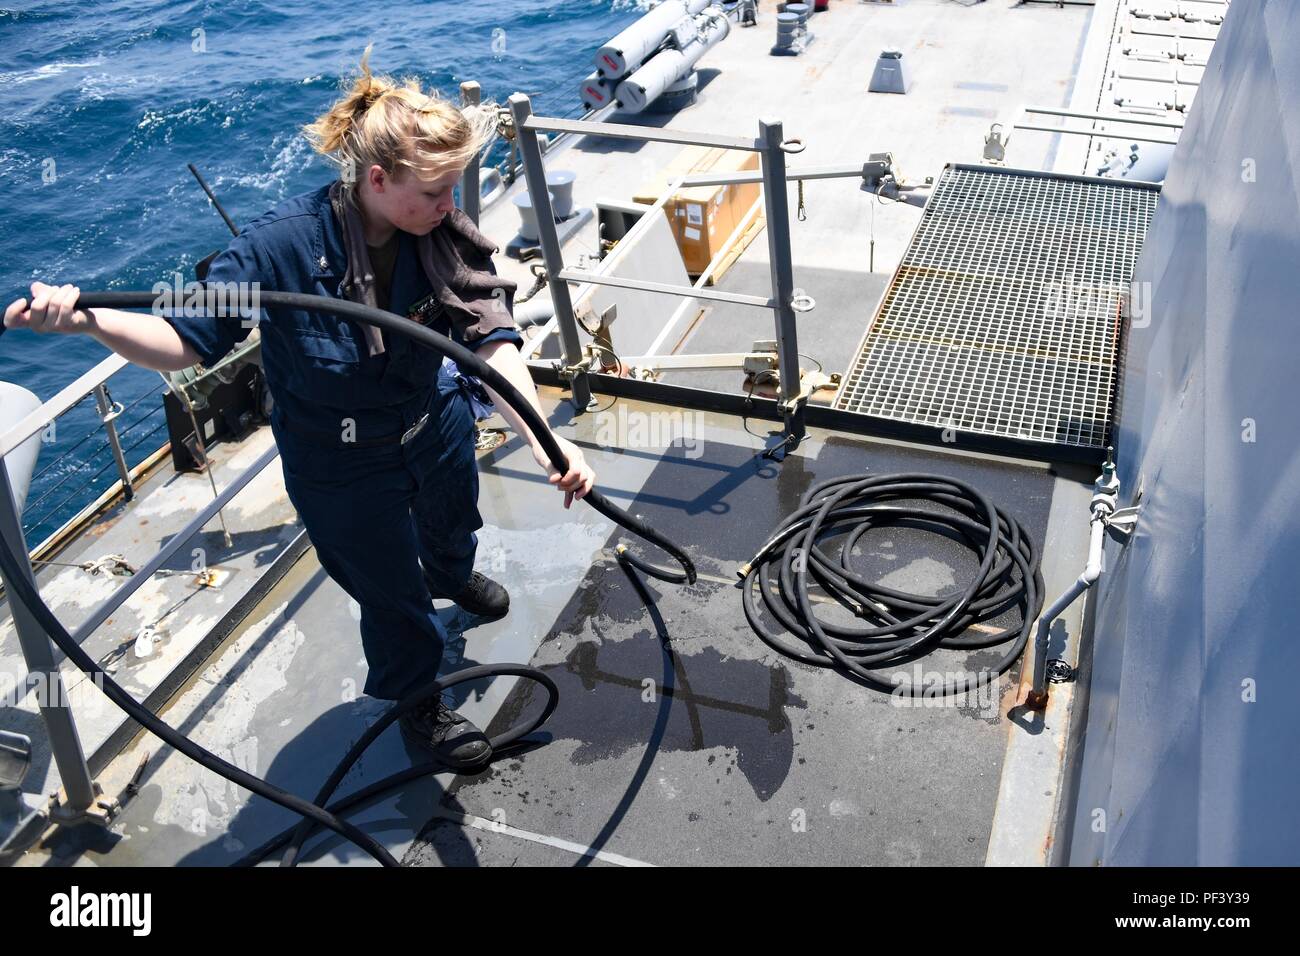 180813-N-RM440-1132 ARABIAN GULF (Aug. 13, 2018) Gas Turbine Systems Technician (Mechanical) 3rd Class Jillian Storey coils a hose after conducting a 72-hour gas turbine engine intake cleaning on the Arleigh-burke class missile-destroyer USS The Sullivans (DDG 68). The Sullivans is deployed to the U.S. 5th Fleet area of operations in support of naval operations to ensure maritime stability and security in the Central region, connecting the Mediterranean and the Pacific through the western Indian Ocean and three strategic choke points. (U.S. Navy photo by Mass Communication Specialist 2nd Class Stock Photo